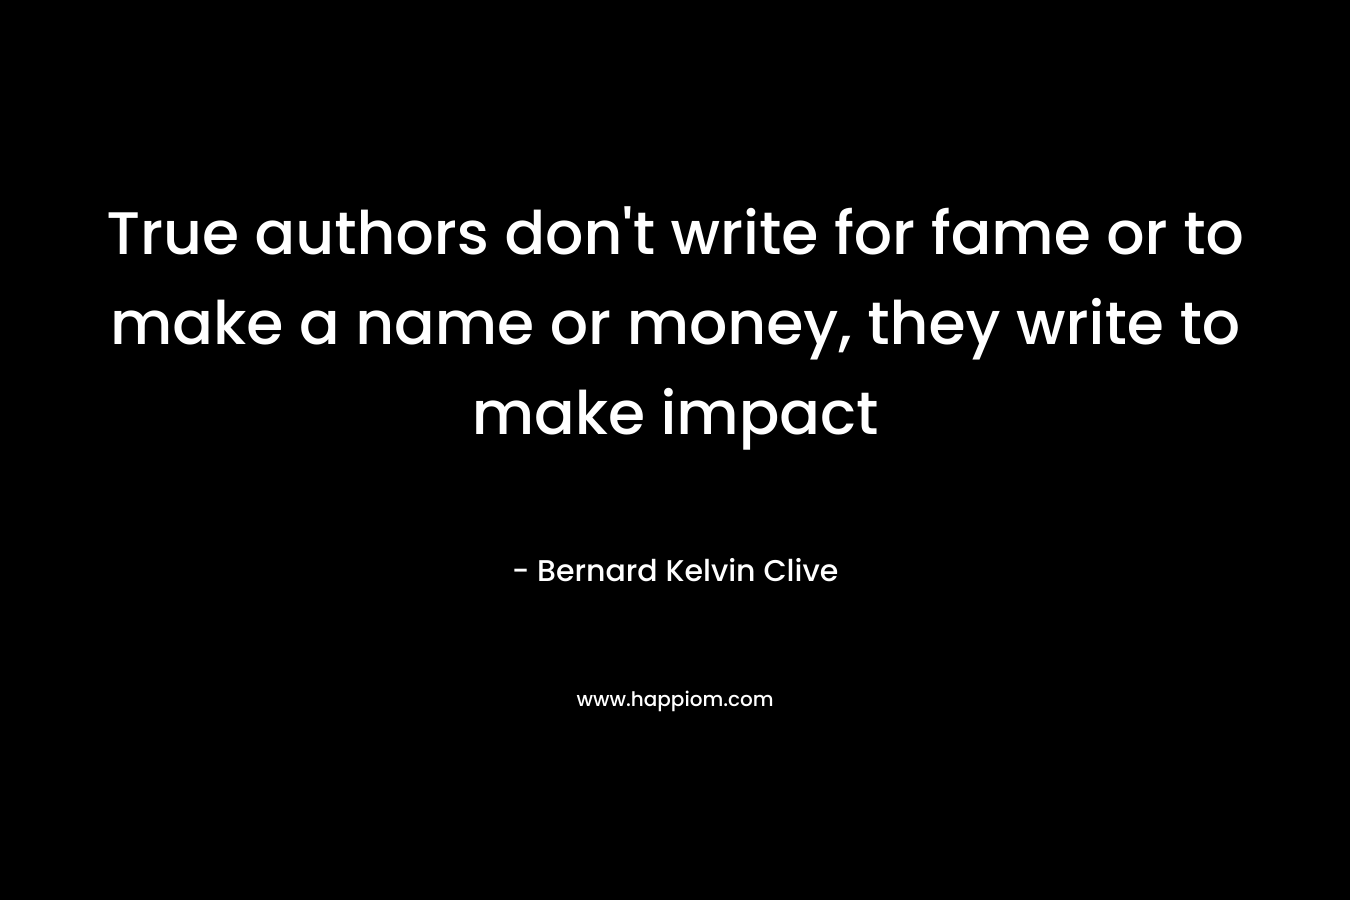 True authors don't write for fame or to make a name or money, they write to make impact